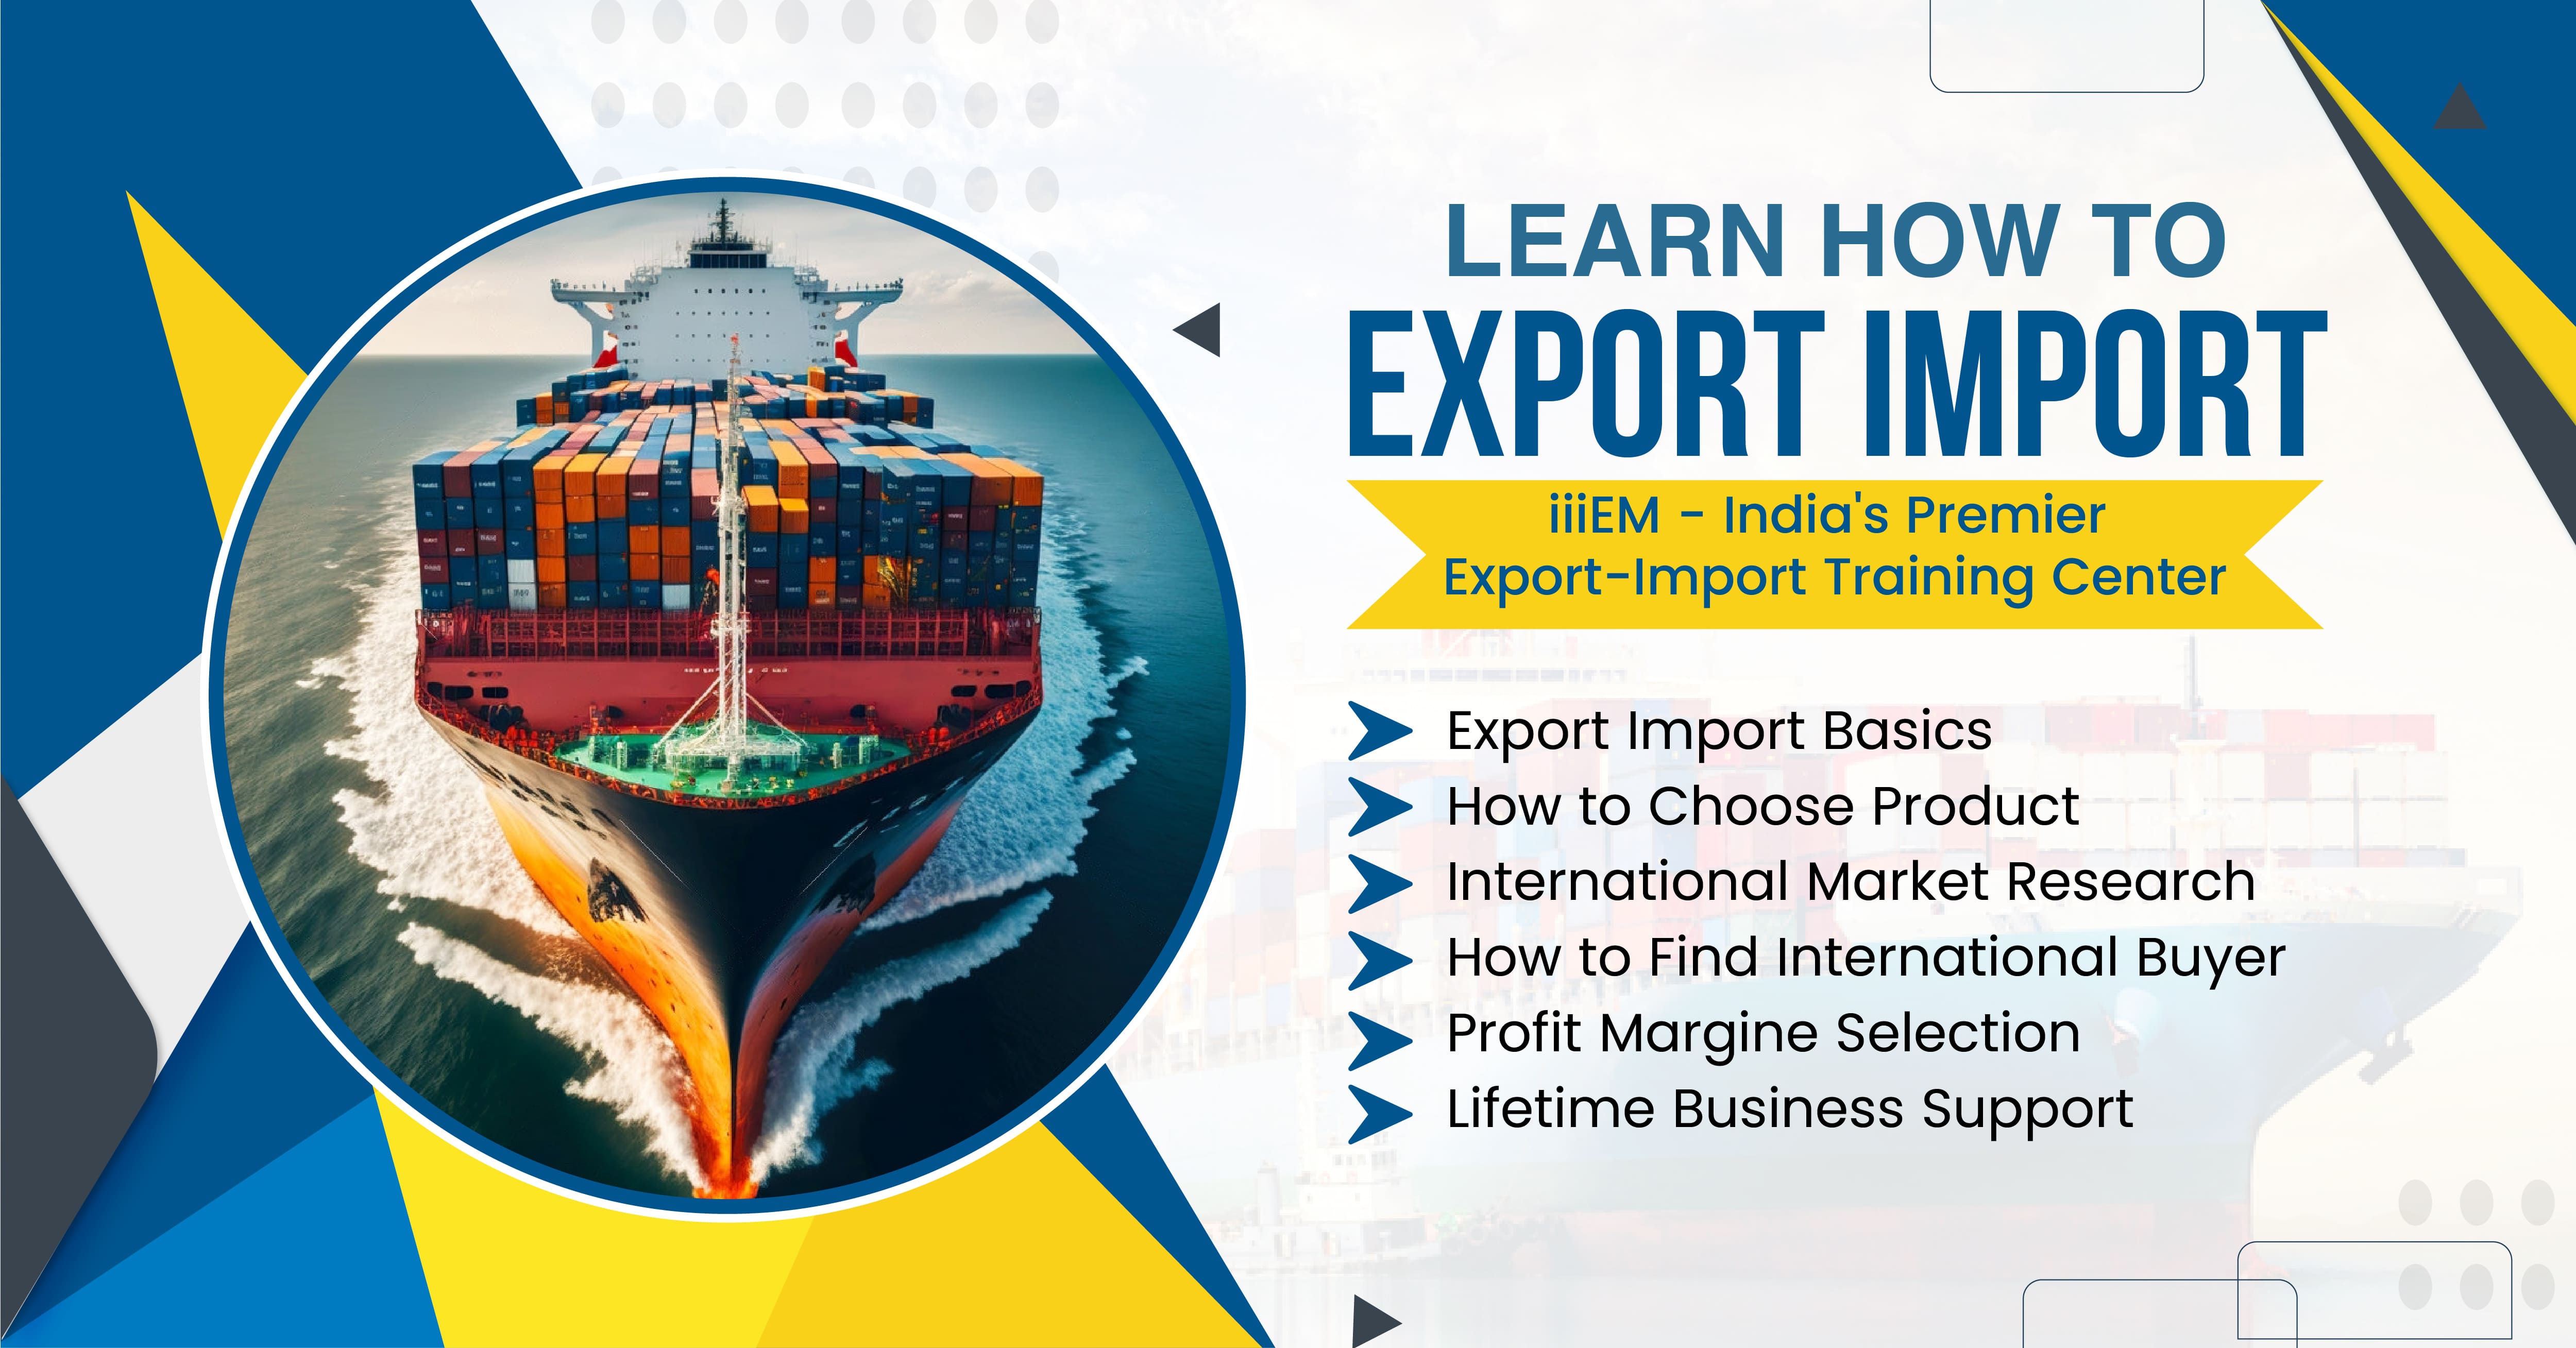 Know The Secrets To Successful Export Import Business In Jaipur, Jaipur, Rajasthan, India